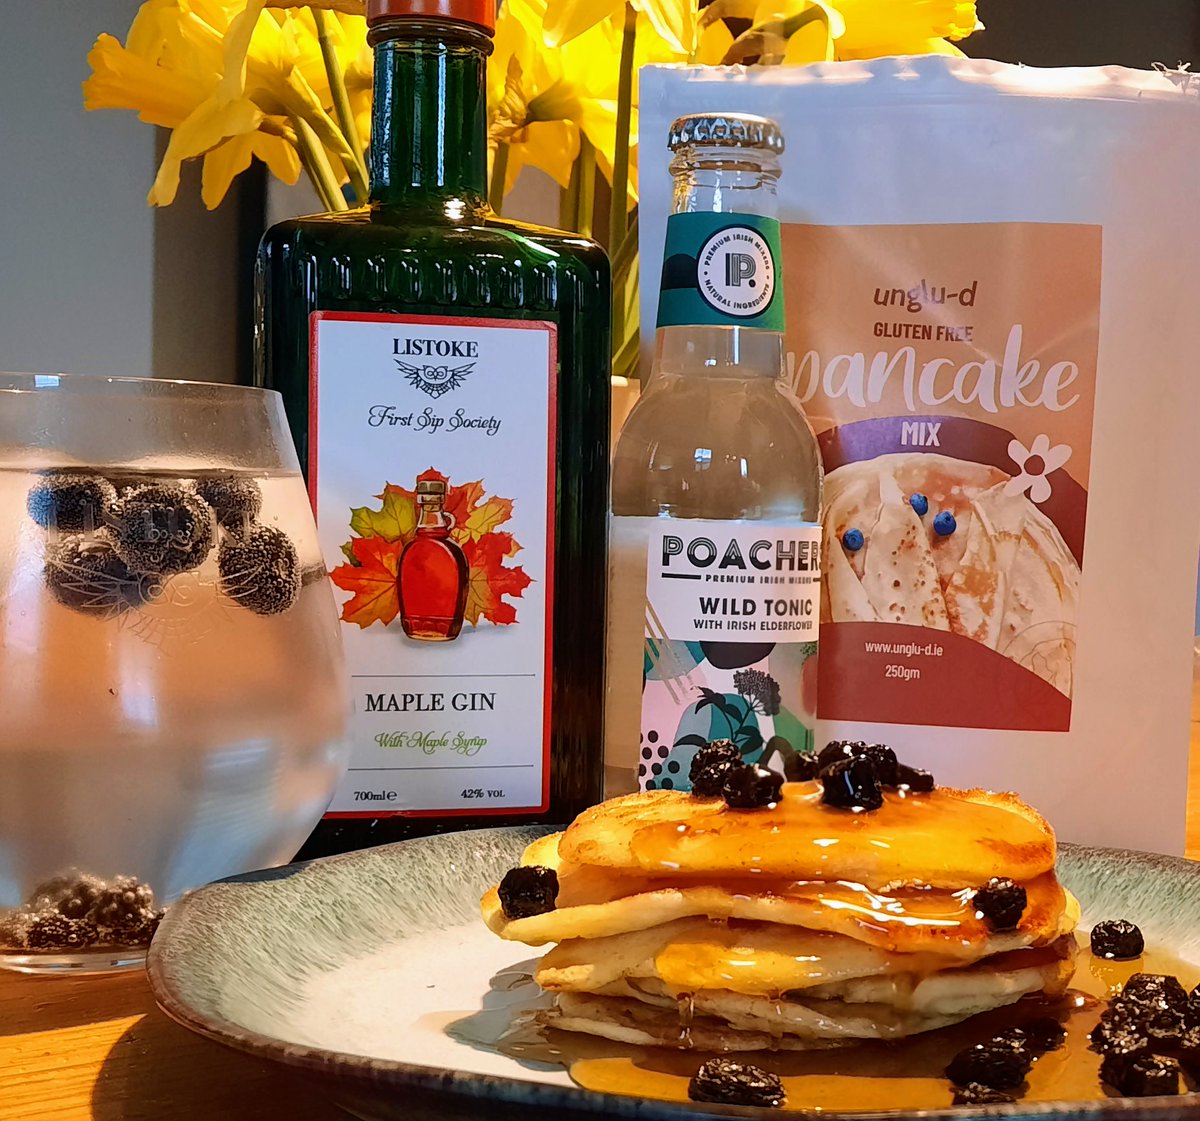 Pancake Tuesday should be a national holiday. Change our minds. This month's First Sip Society is a Maple Gin with @PoachersDrinks Wild tonic and dried blueberries as garnish. Thank you to @unglu_d for their amazing gluten free pancakes as our gift!